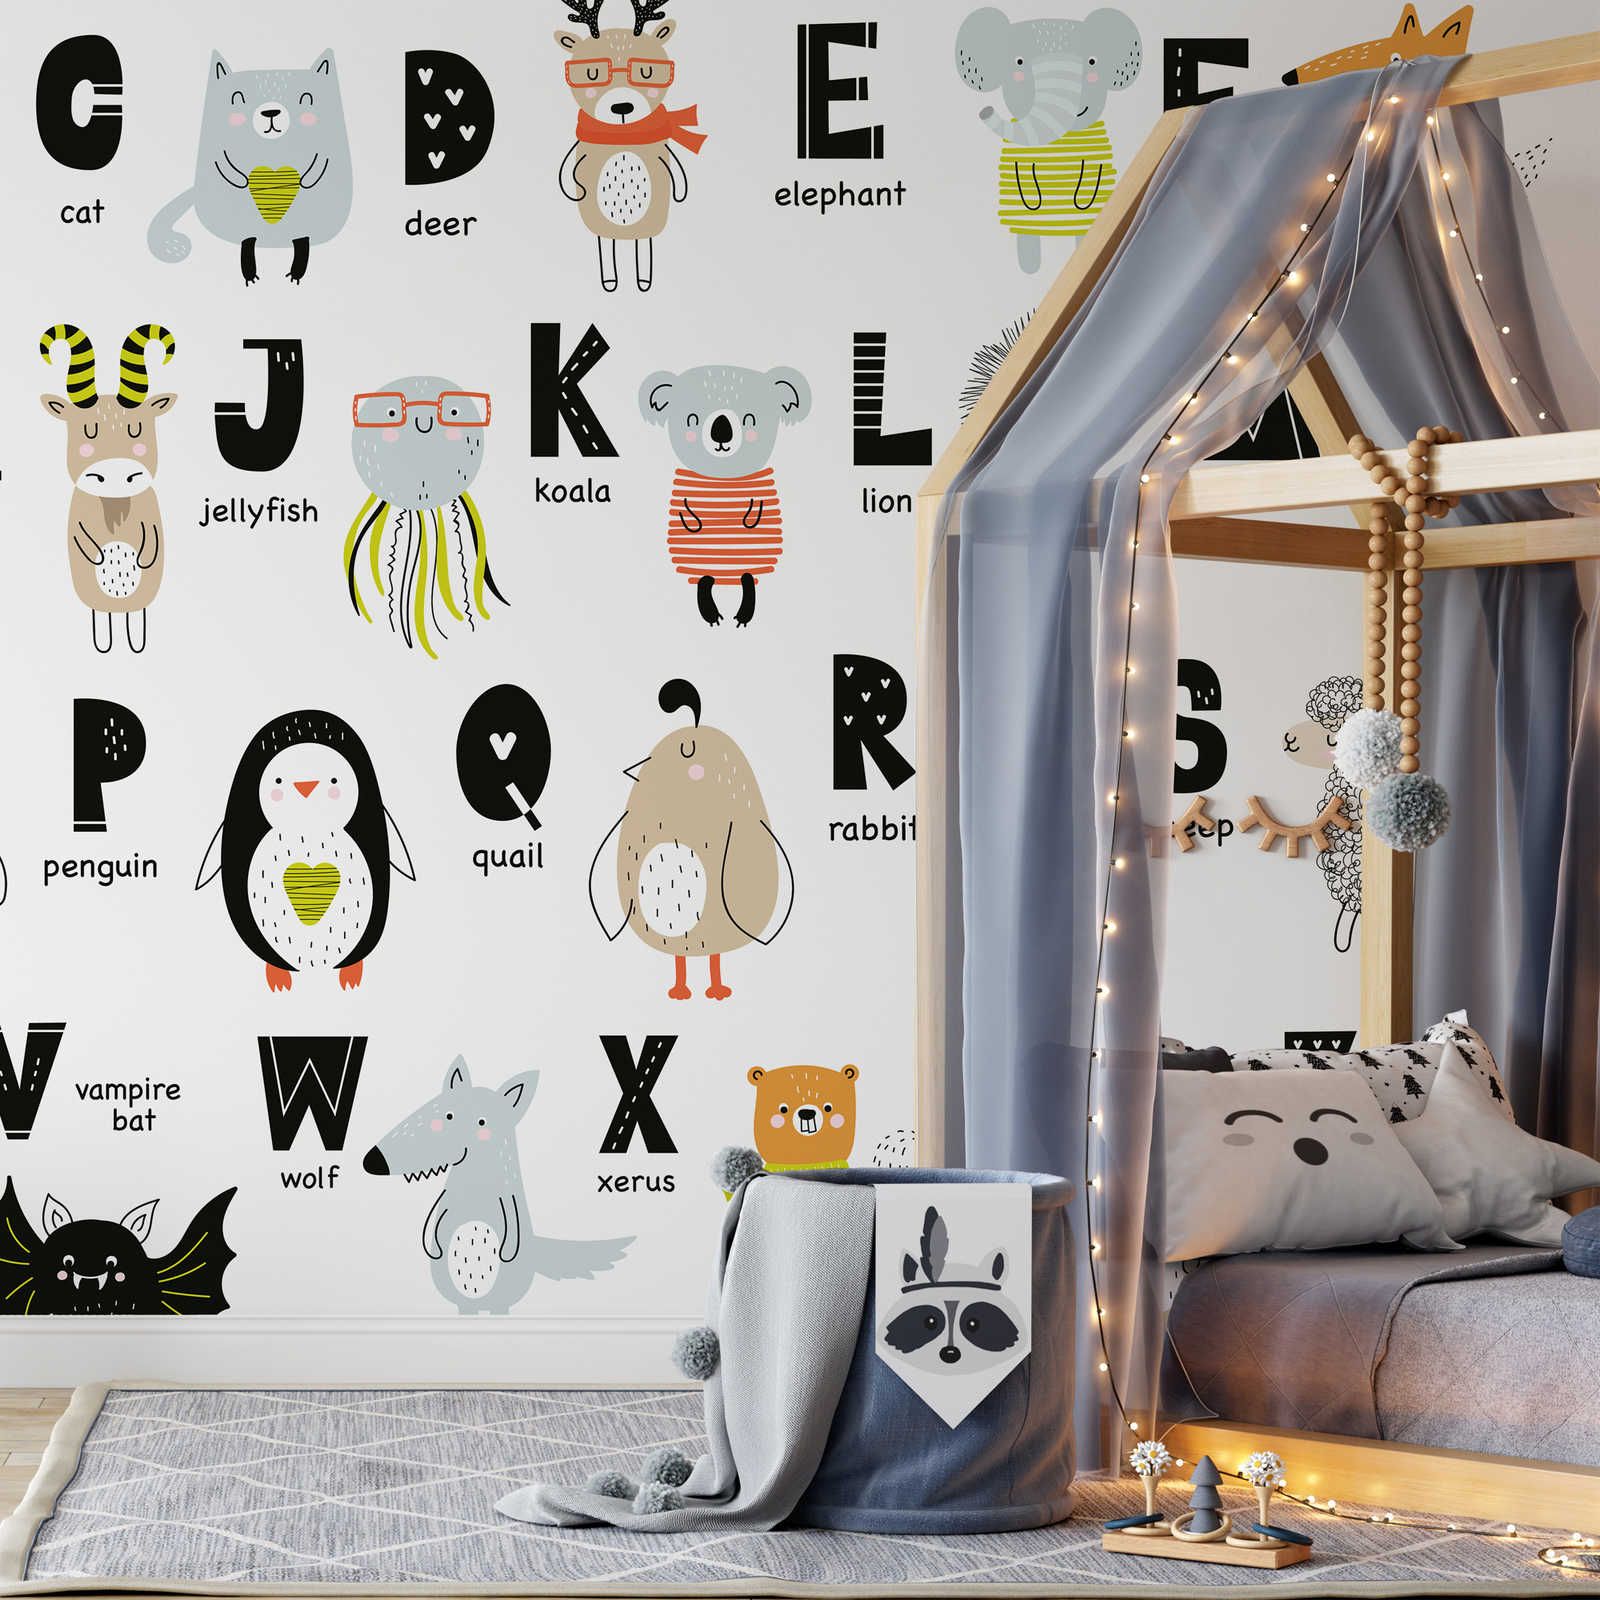 Photo wallpaper Alphabet with animals and animal names - Smooth & pearlescent fleece
